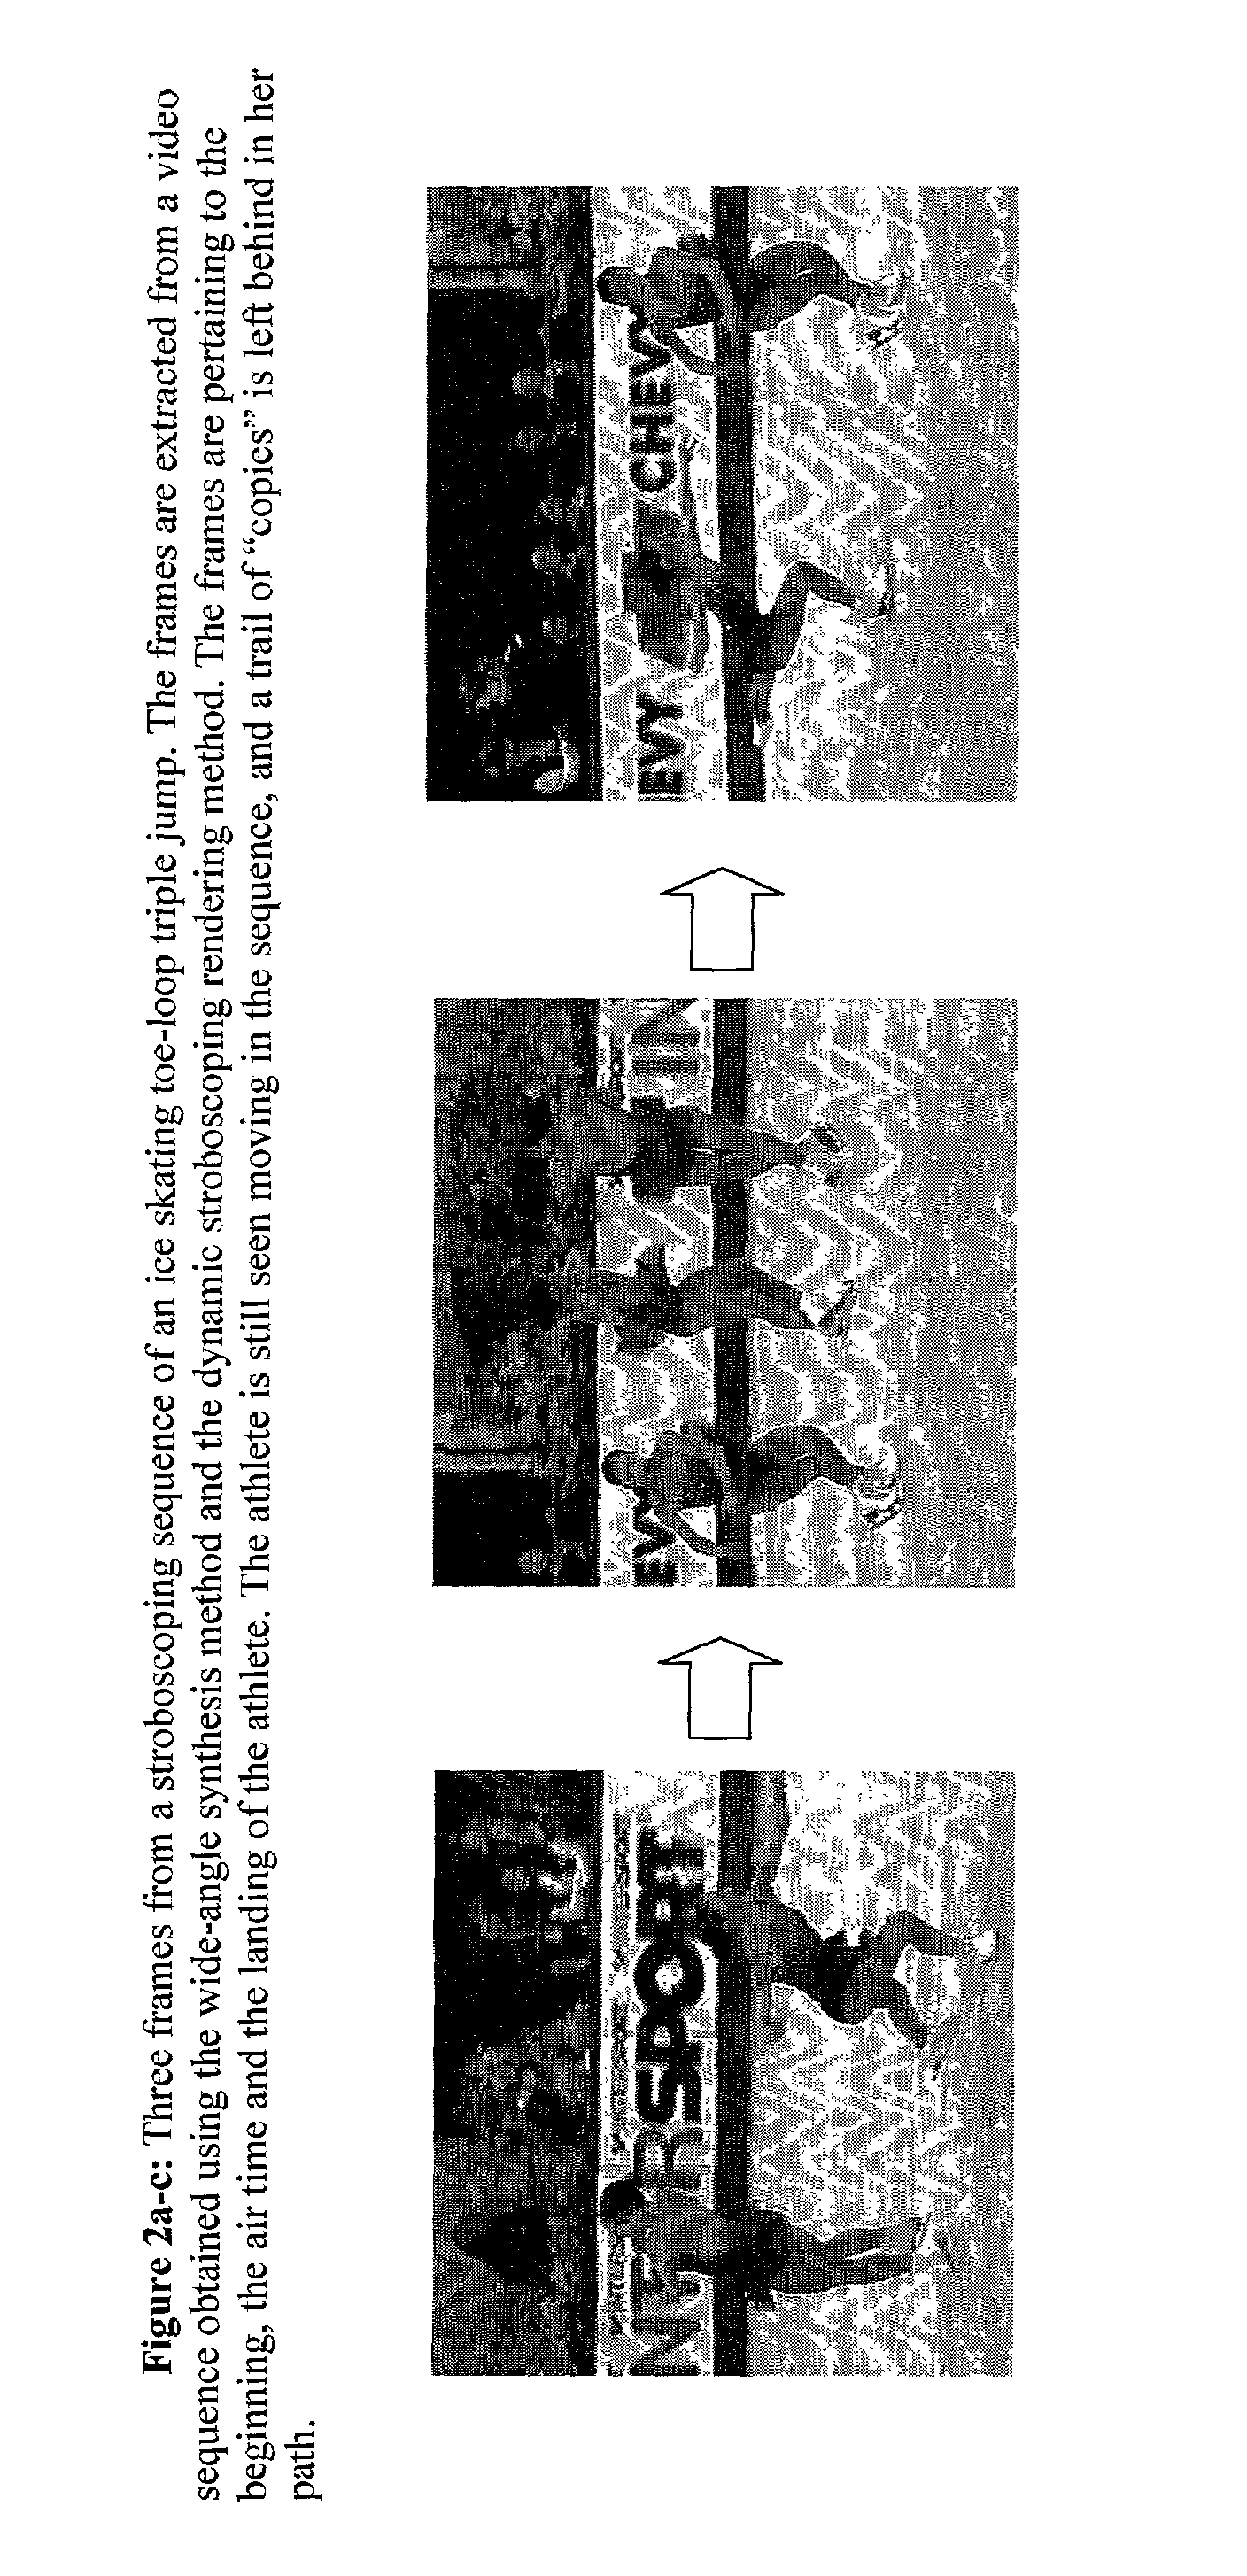 Automated stroboscoping of video sequences